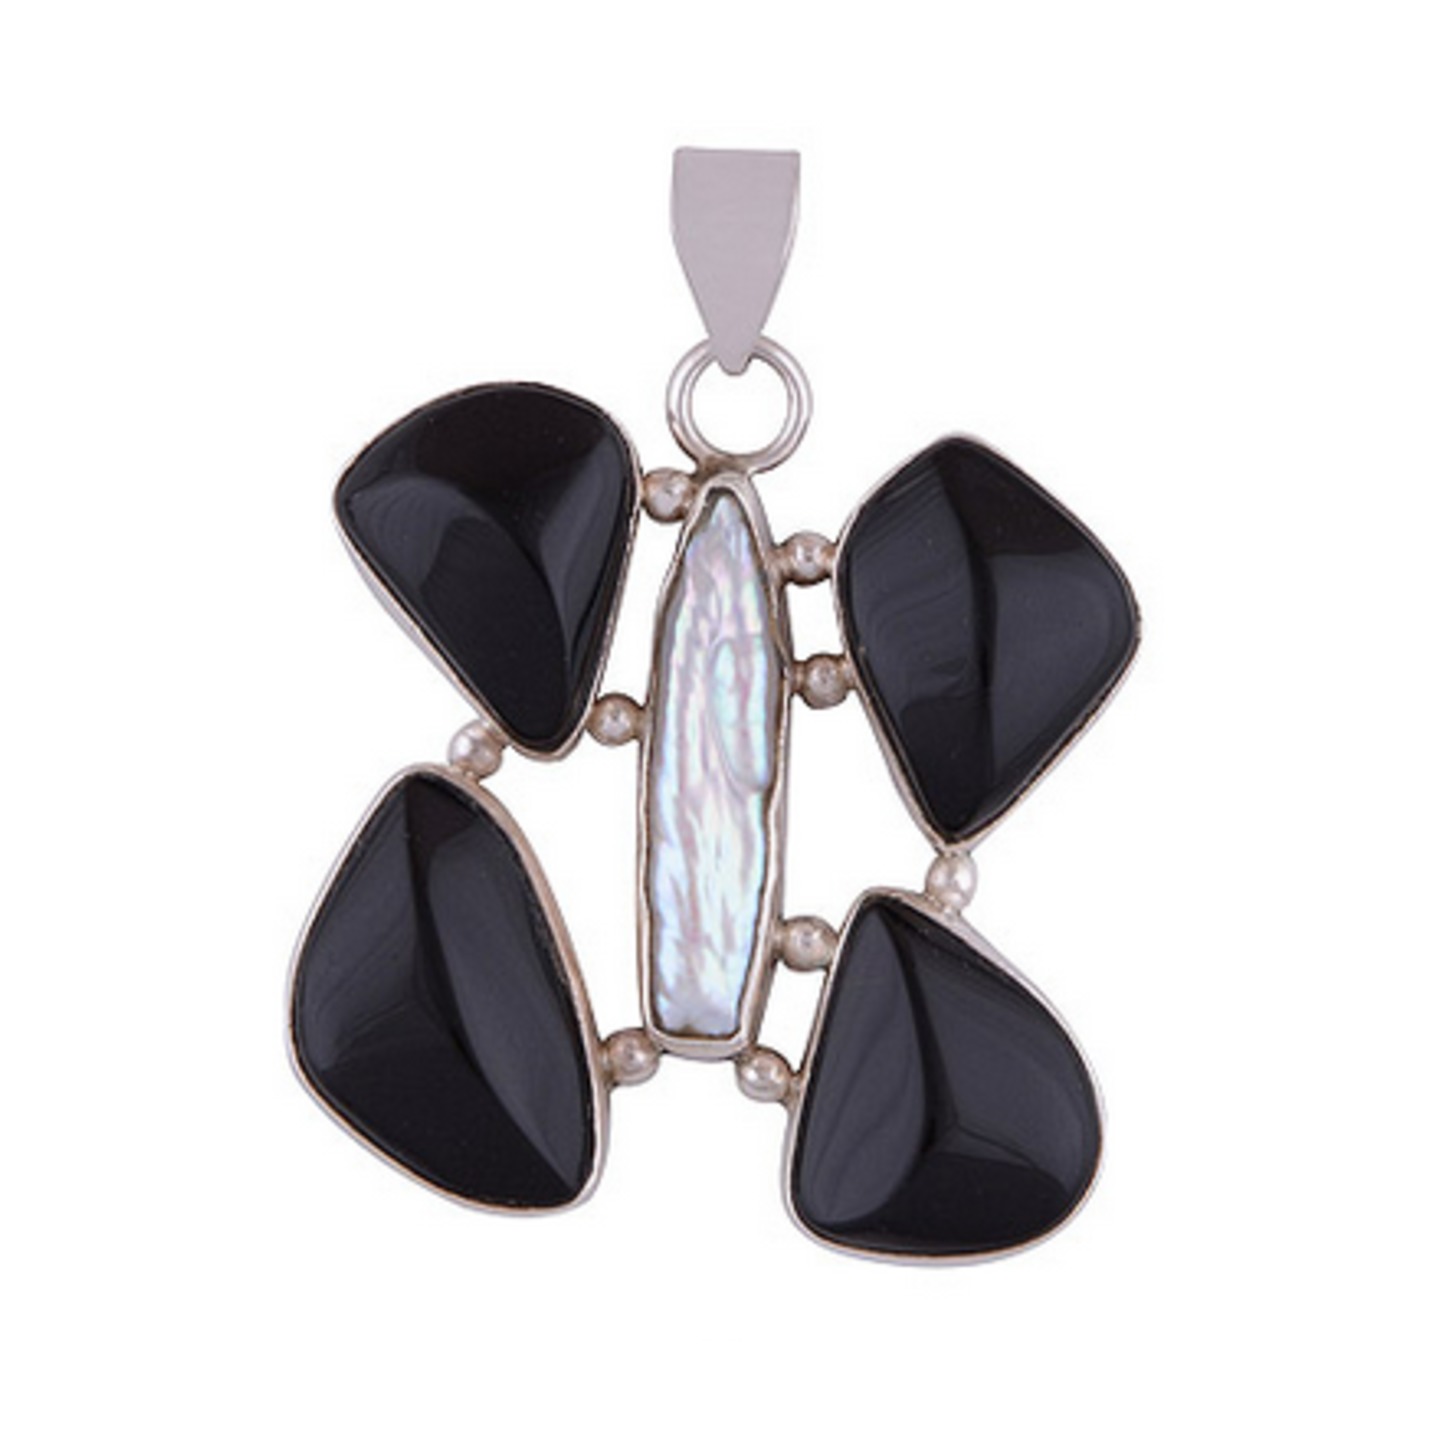 The Black Onyx & Shell Silver Butterfly Pendant